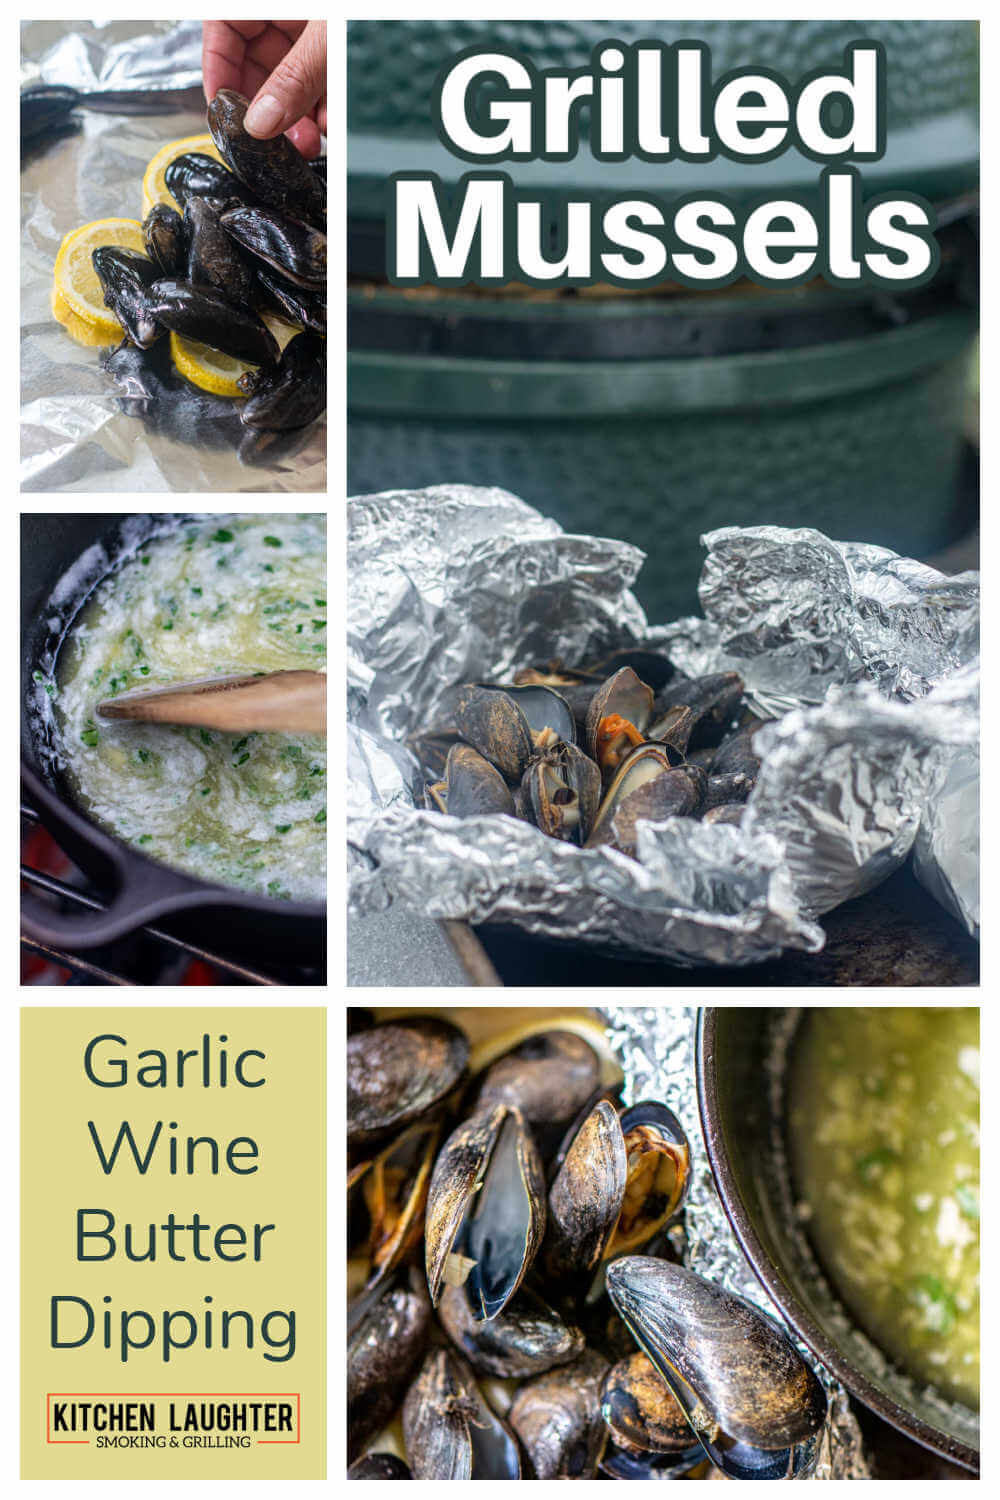 Grilled Mussels in a Foil Pack